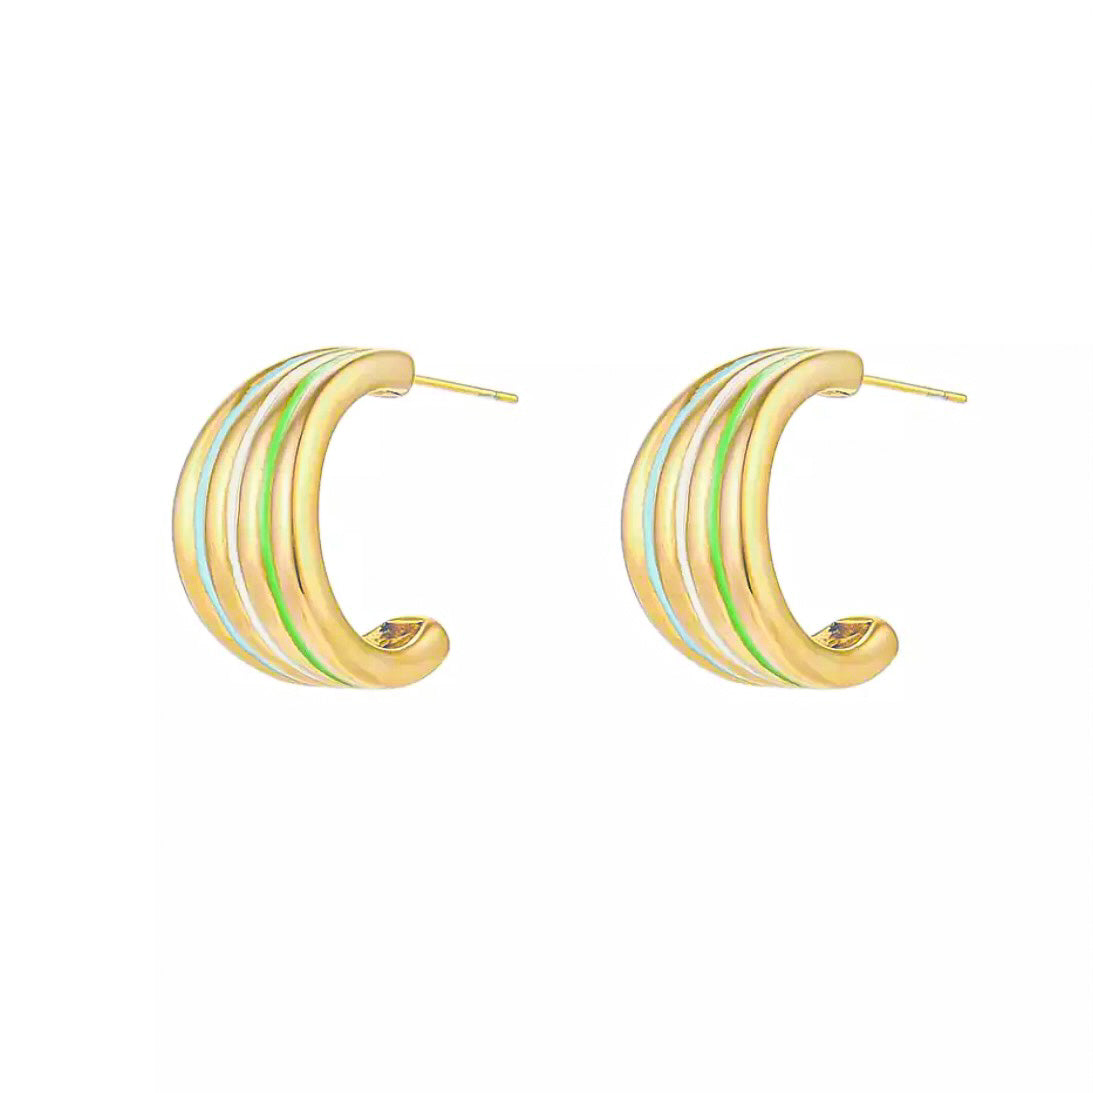 Vincent C-Shaped Earrings│18k Gold Plated